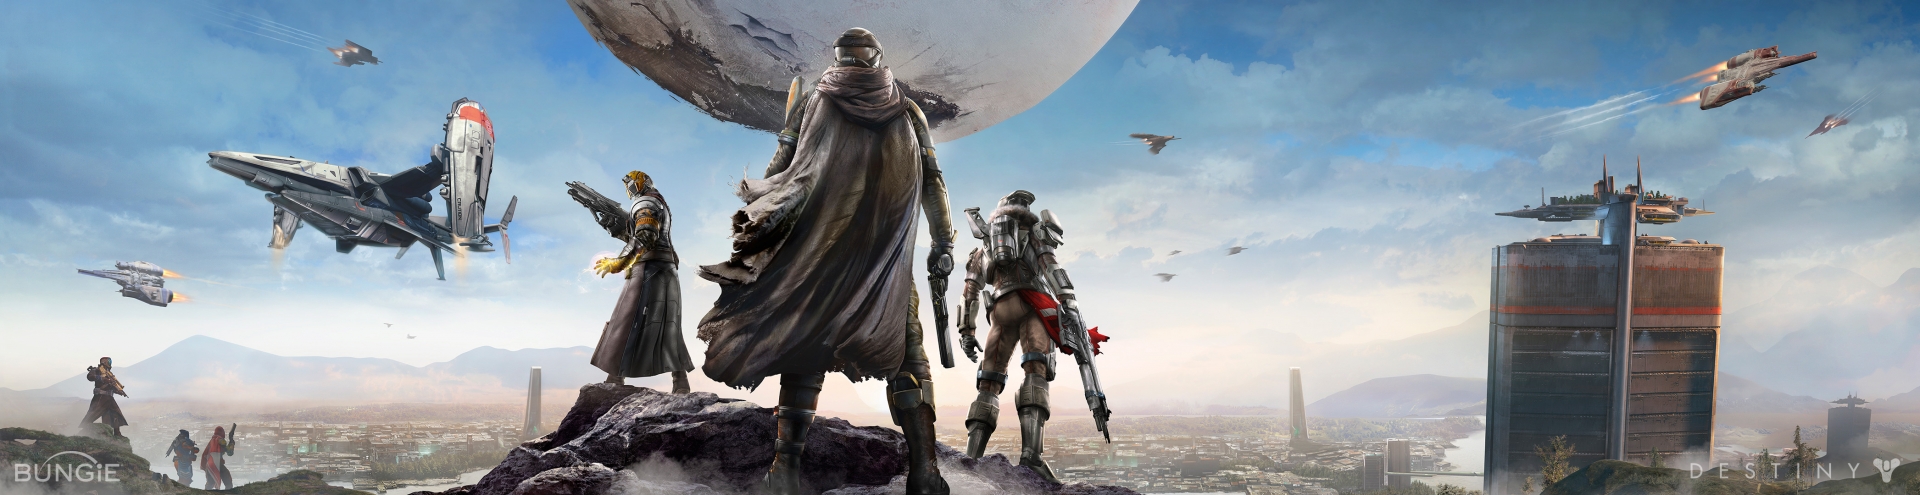 Reveals Breathtaking HD panoramic Wallpapers for Destiny PS4 and Xbox